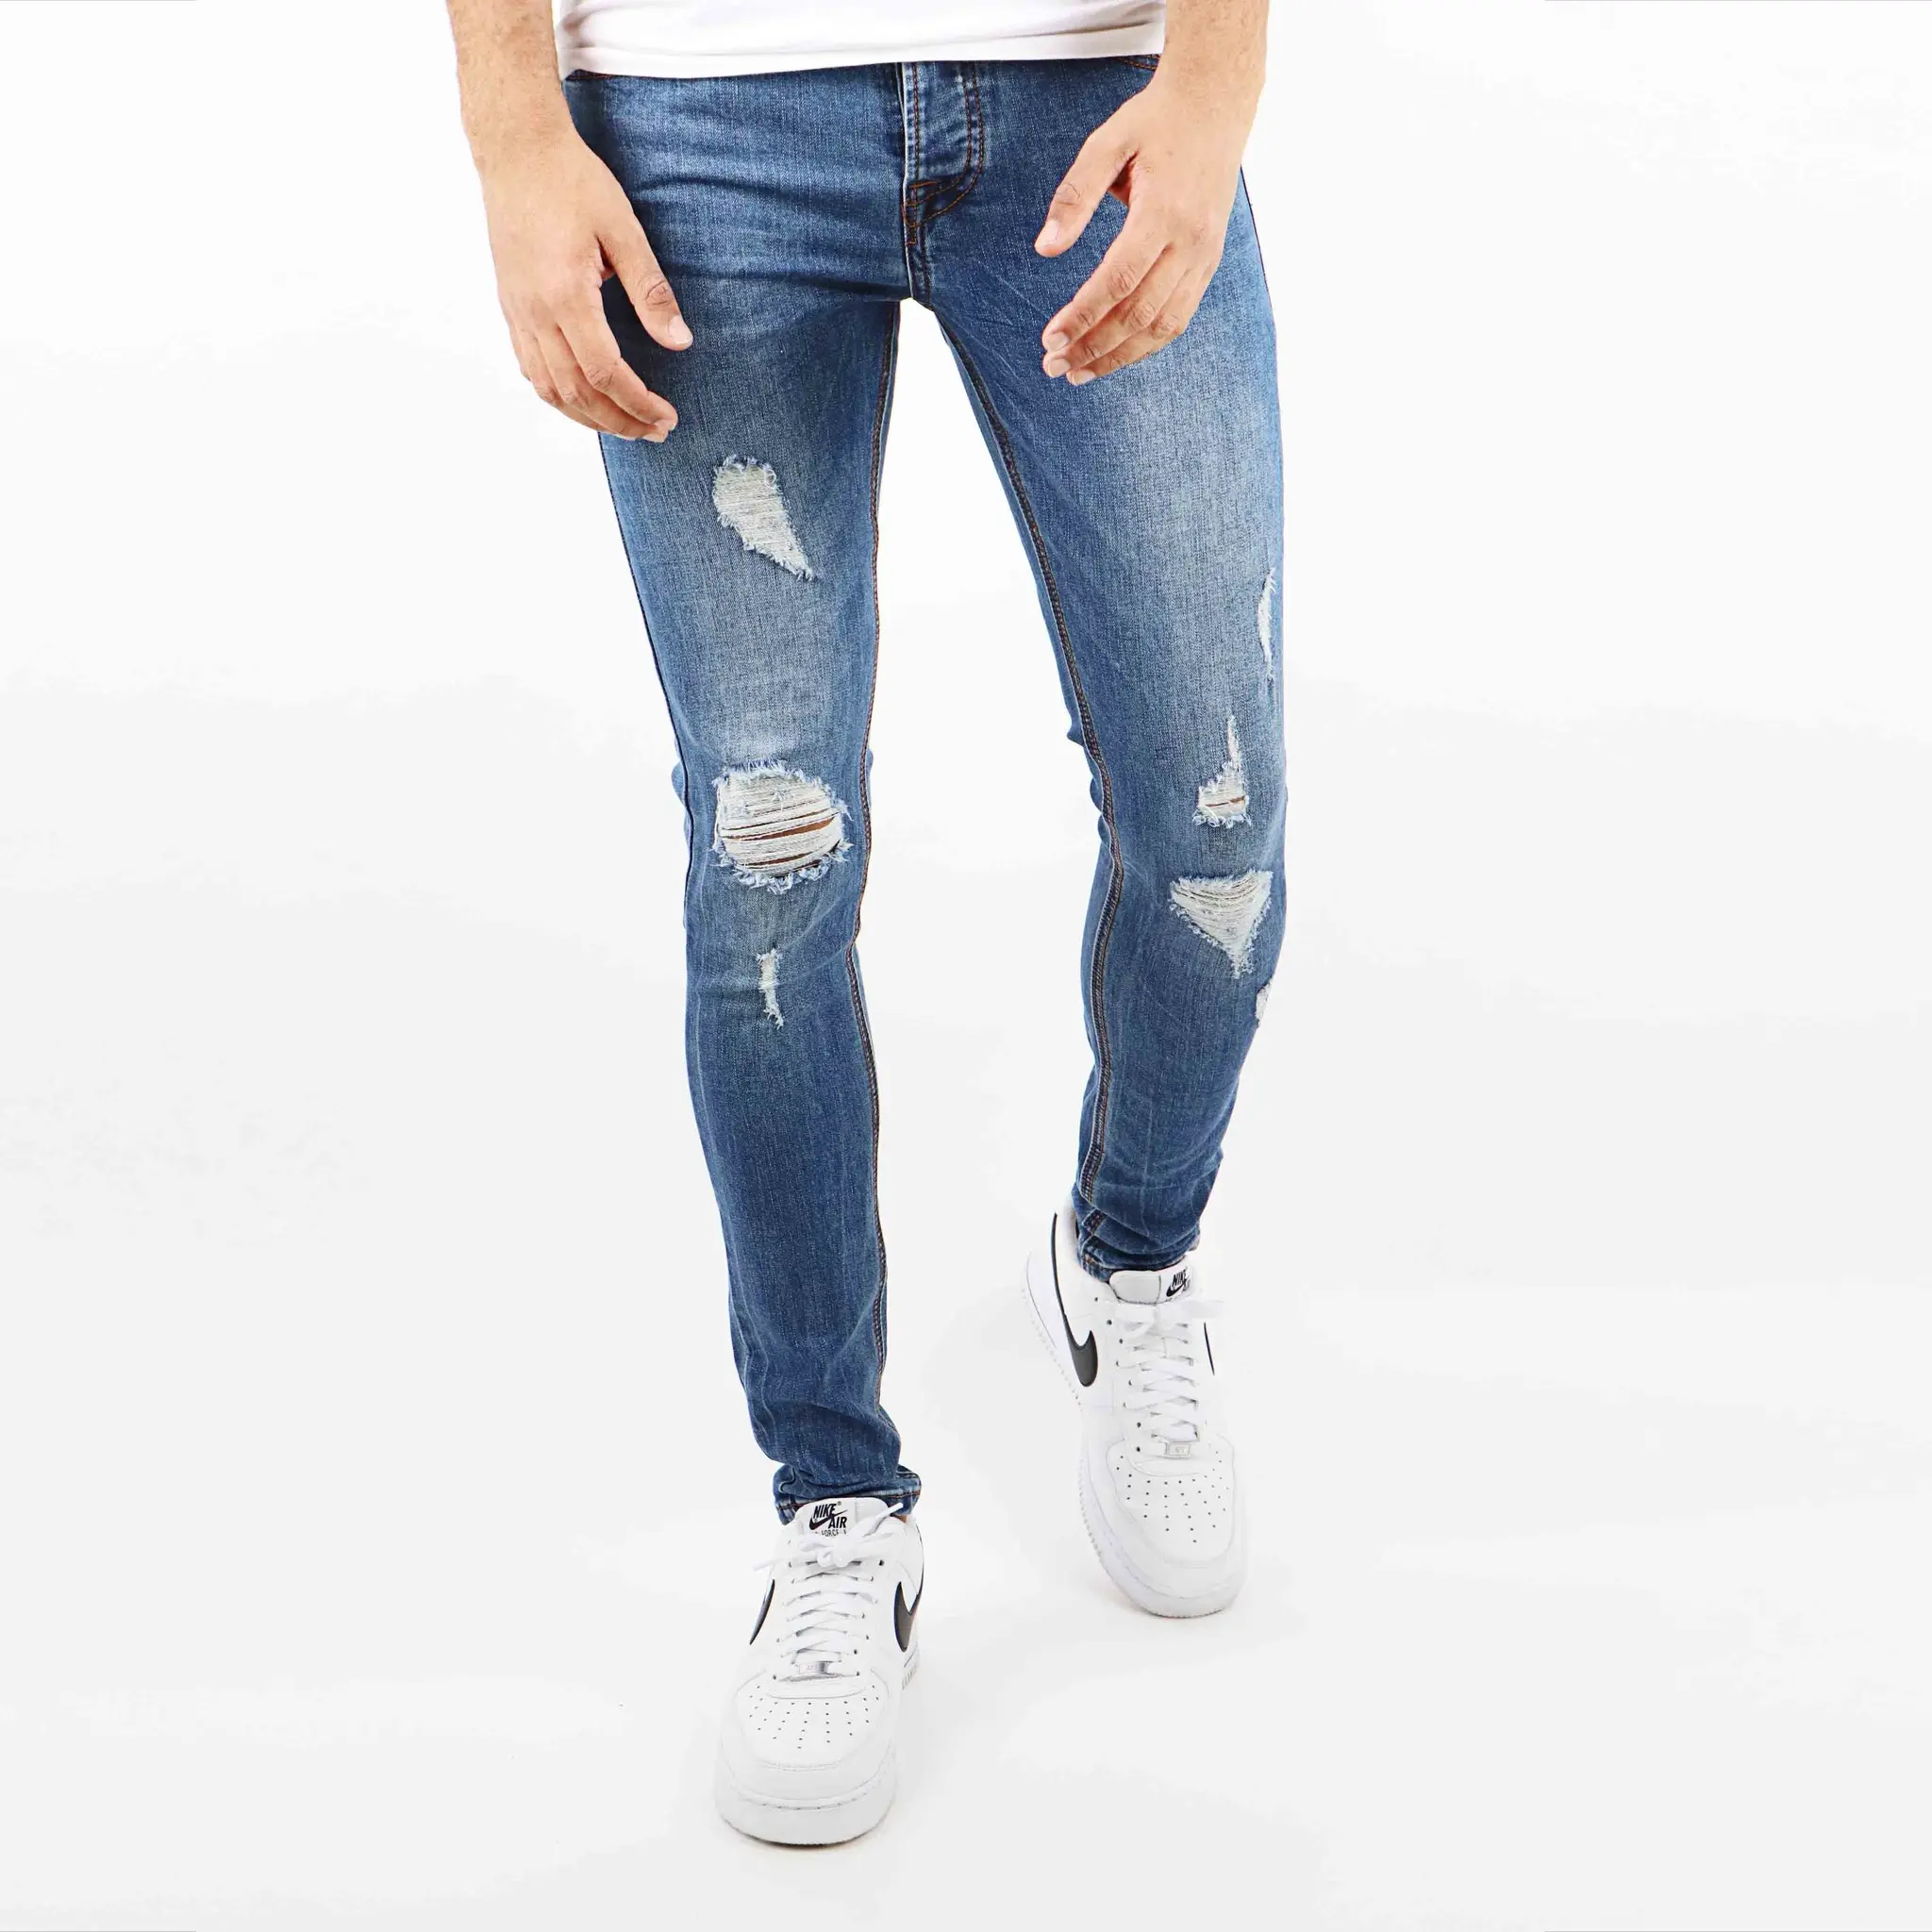 Factory Directly Wholesale Designers Blue Jeans Mens Ripped Skinny Stretch Denim Pants Slim Men's Jeans From Bangladesh